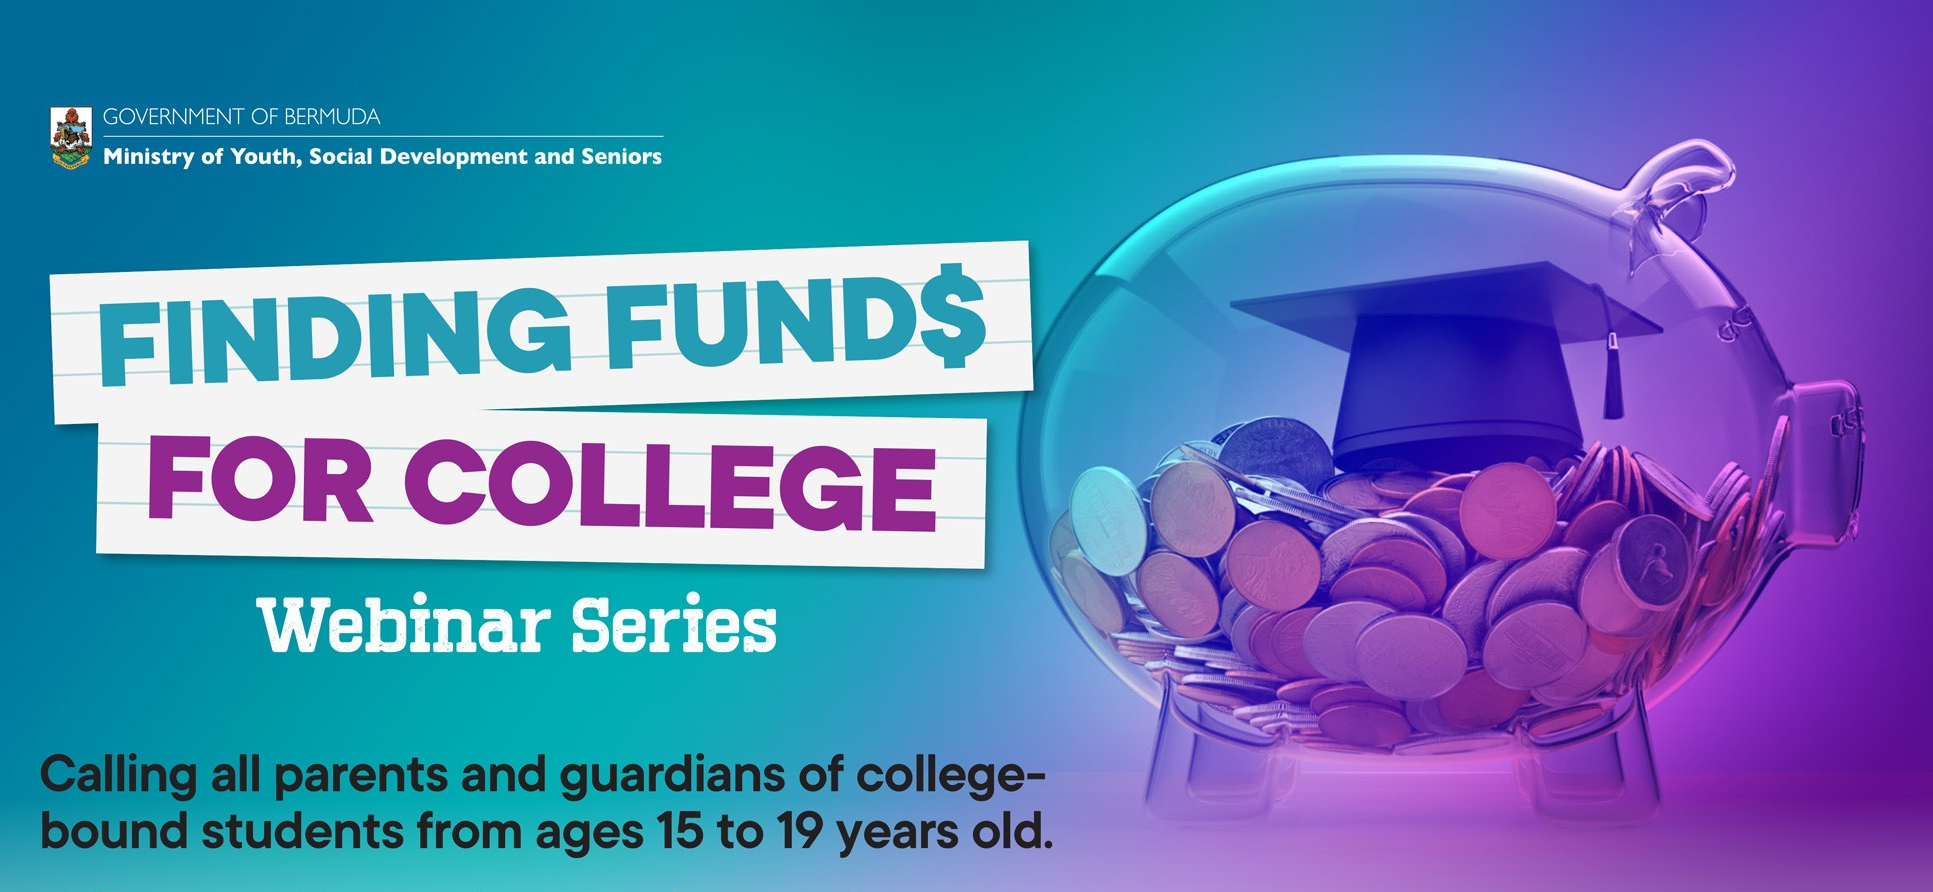 Finding Funds for College